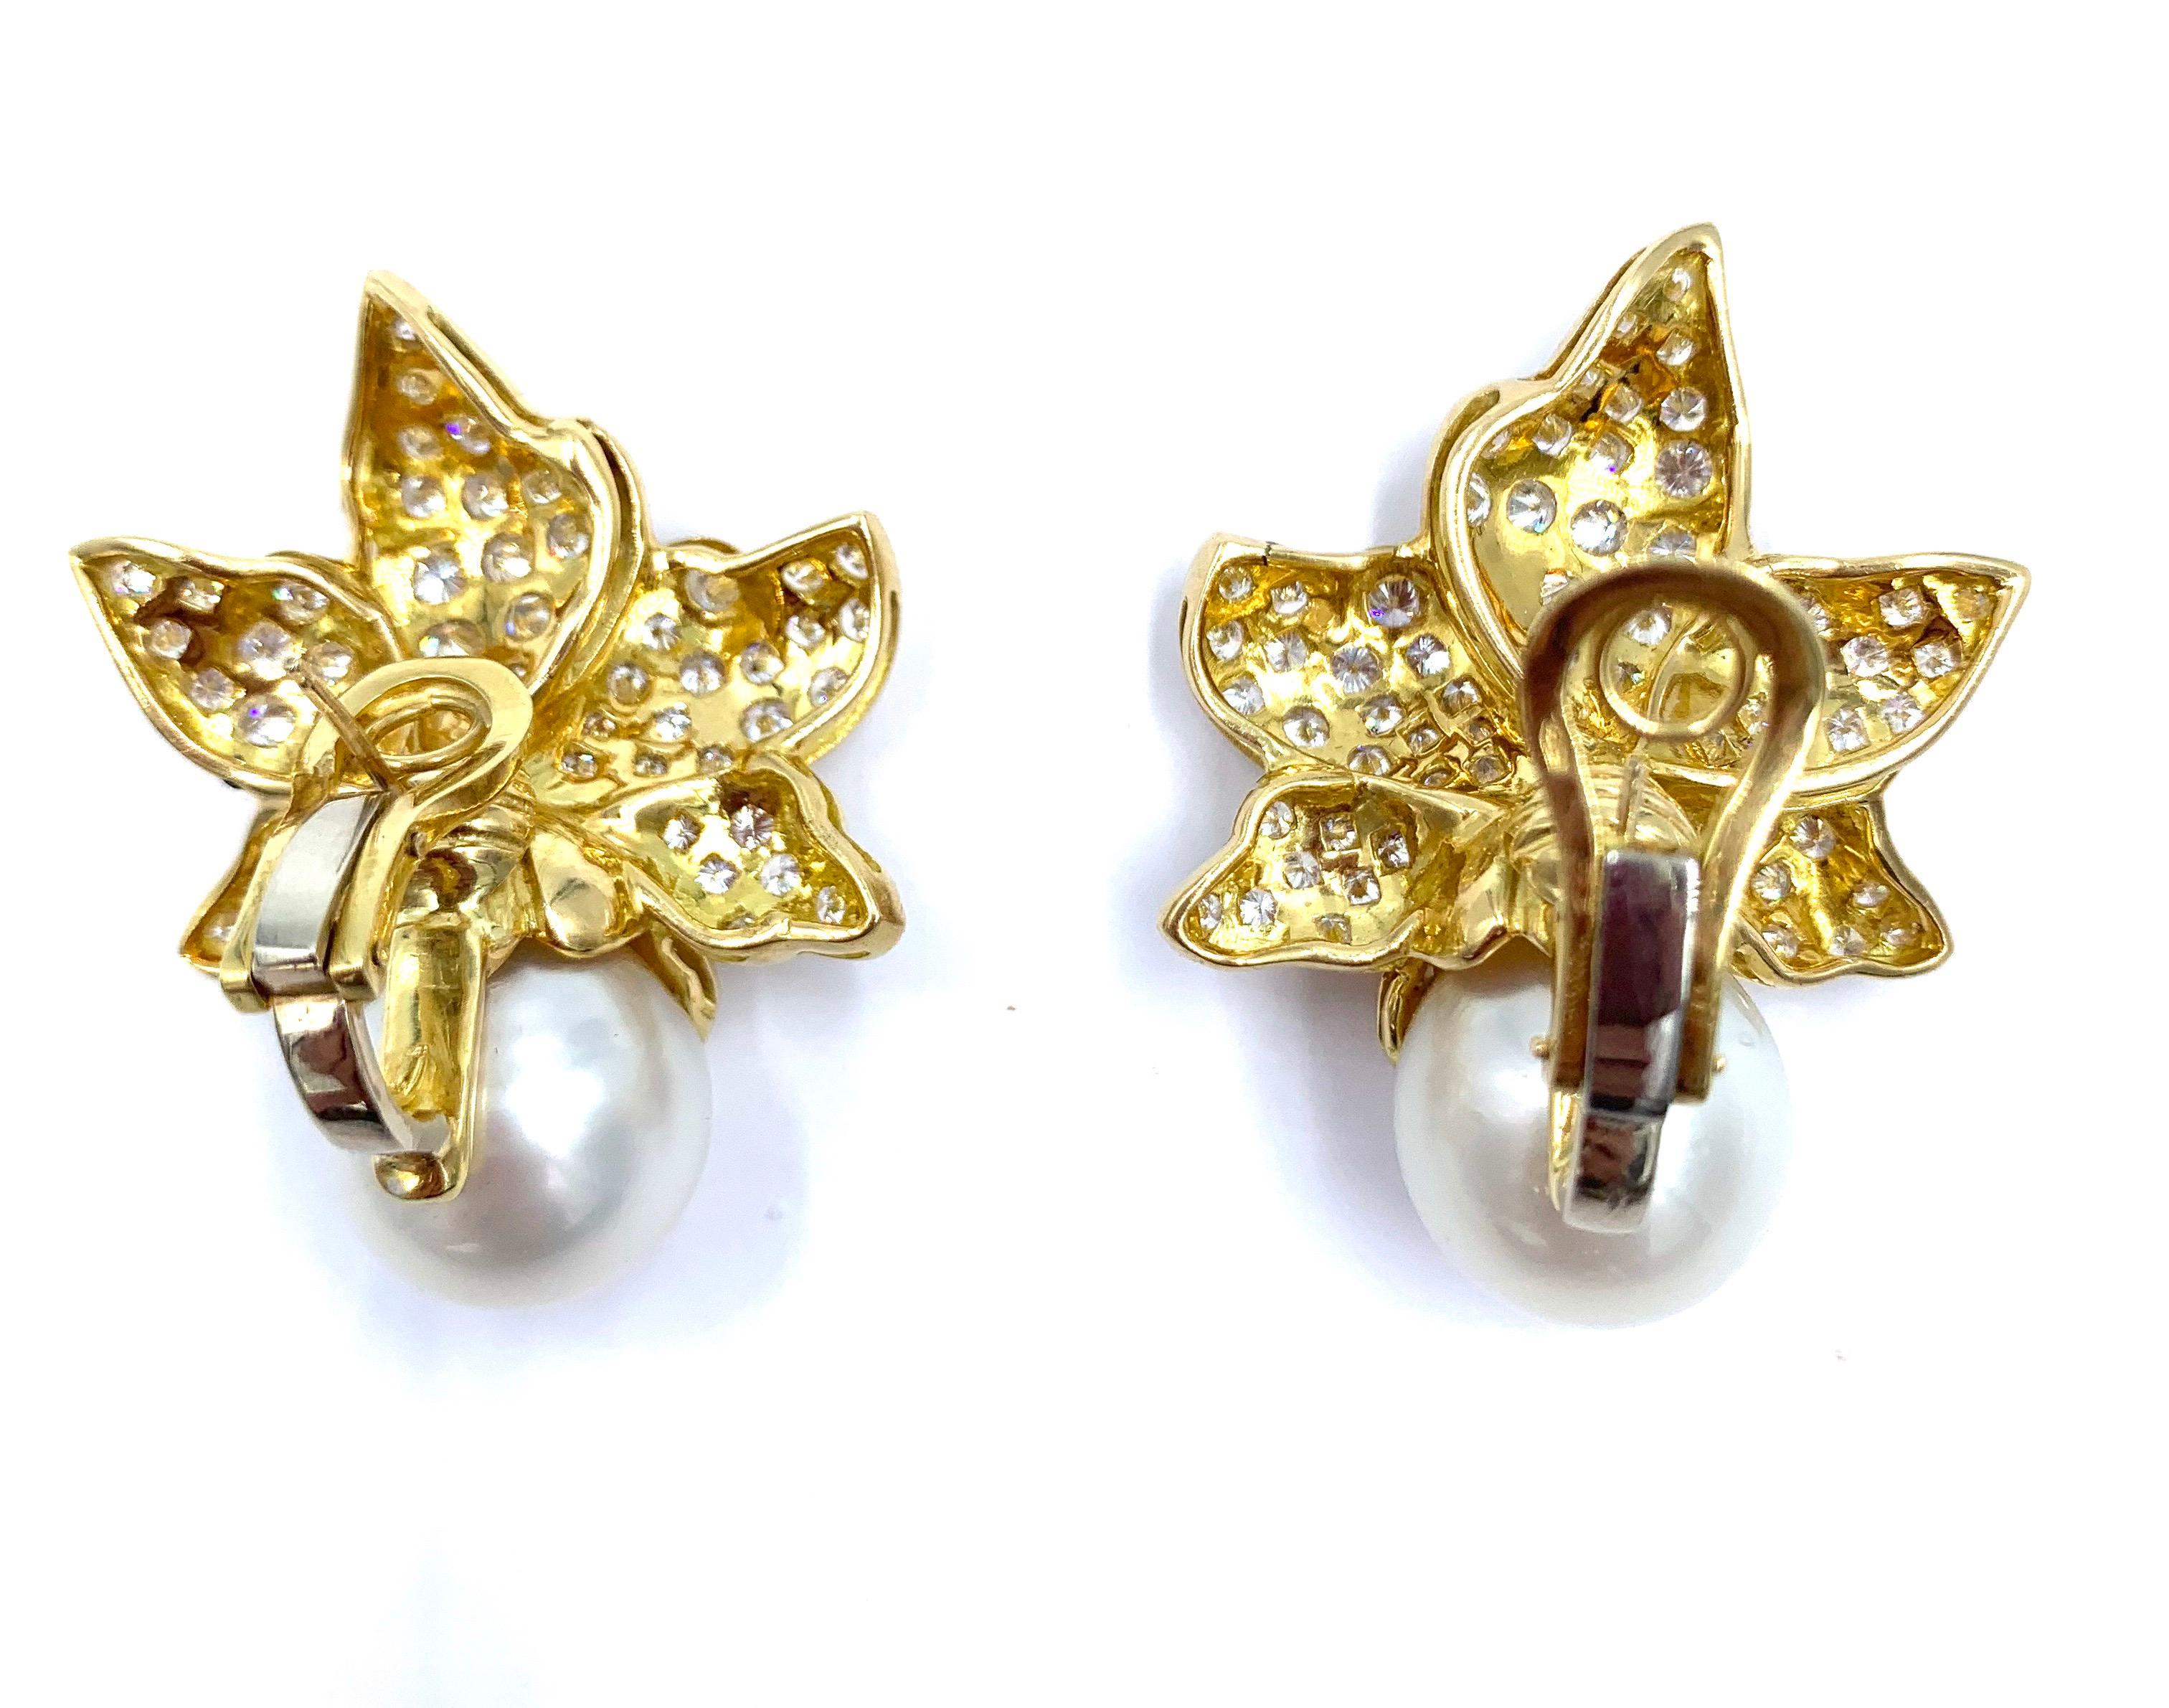 18 Karat Gold and Diamond Flower Shaped Earrings with Huge South Sea Pearl For Sale 3